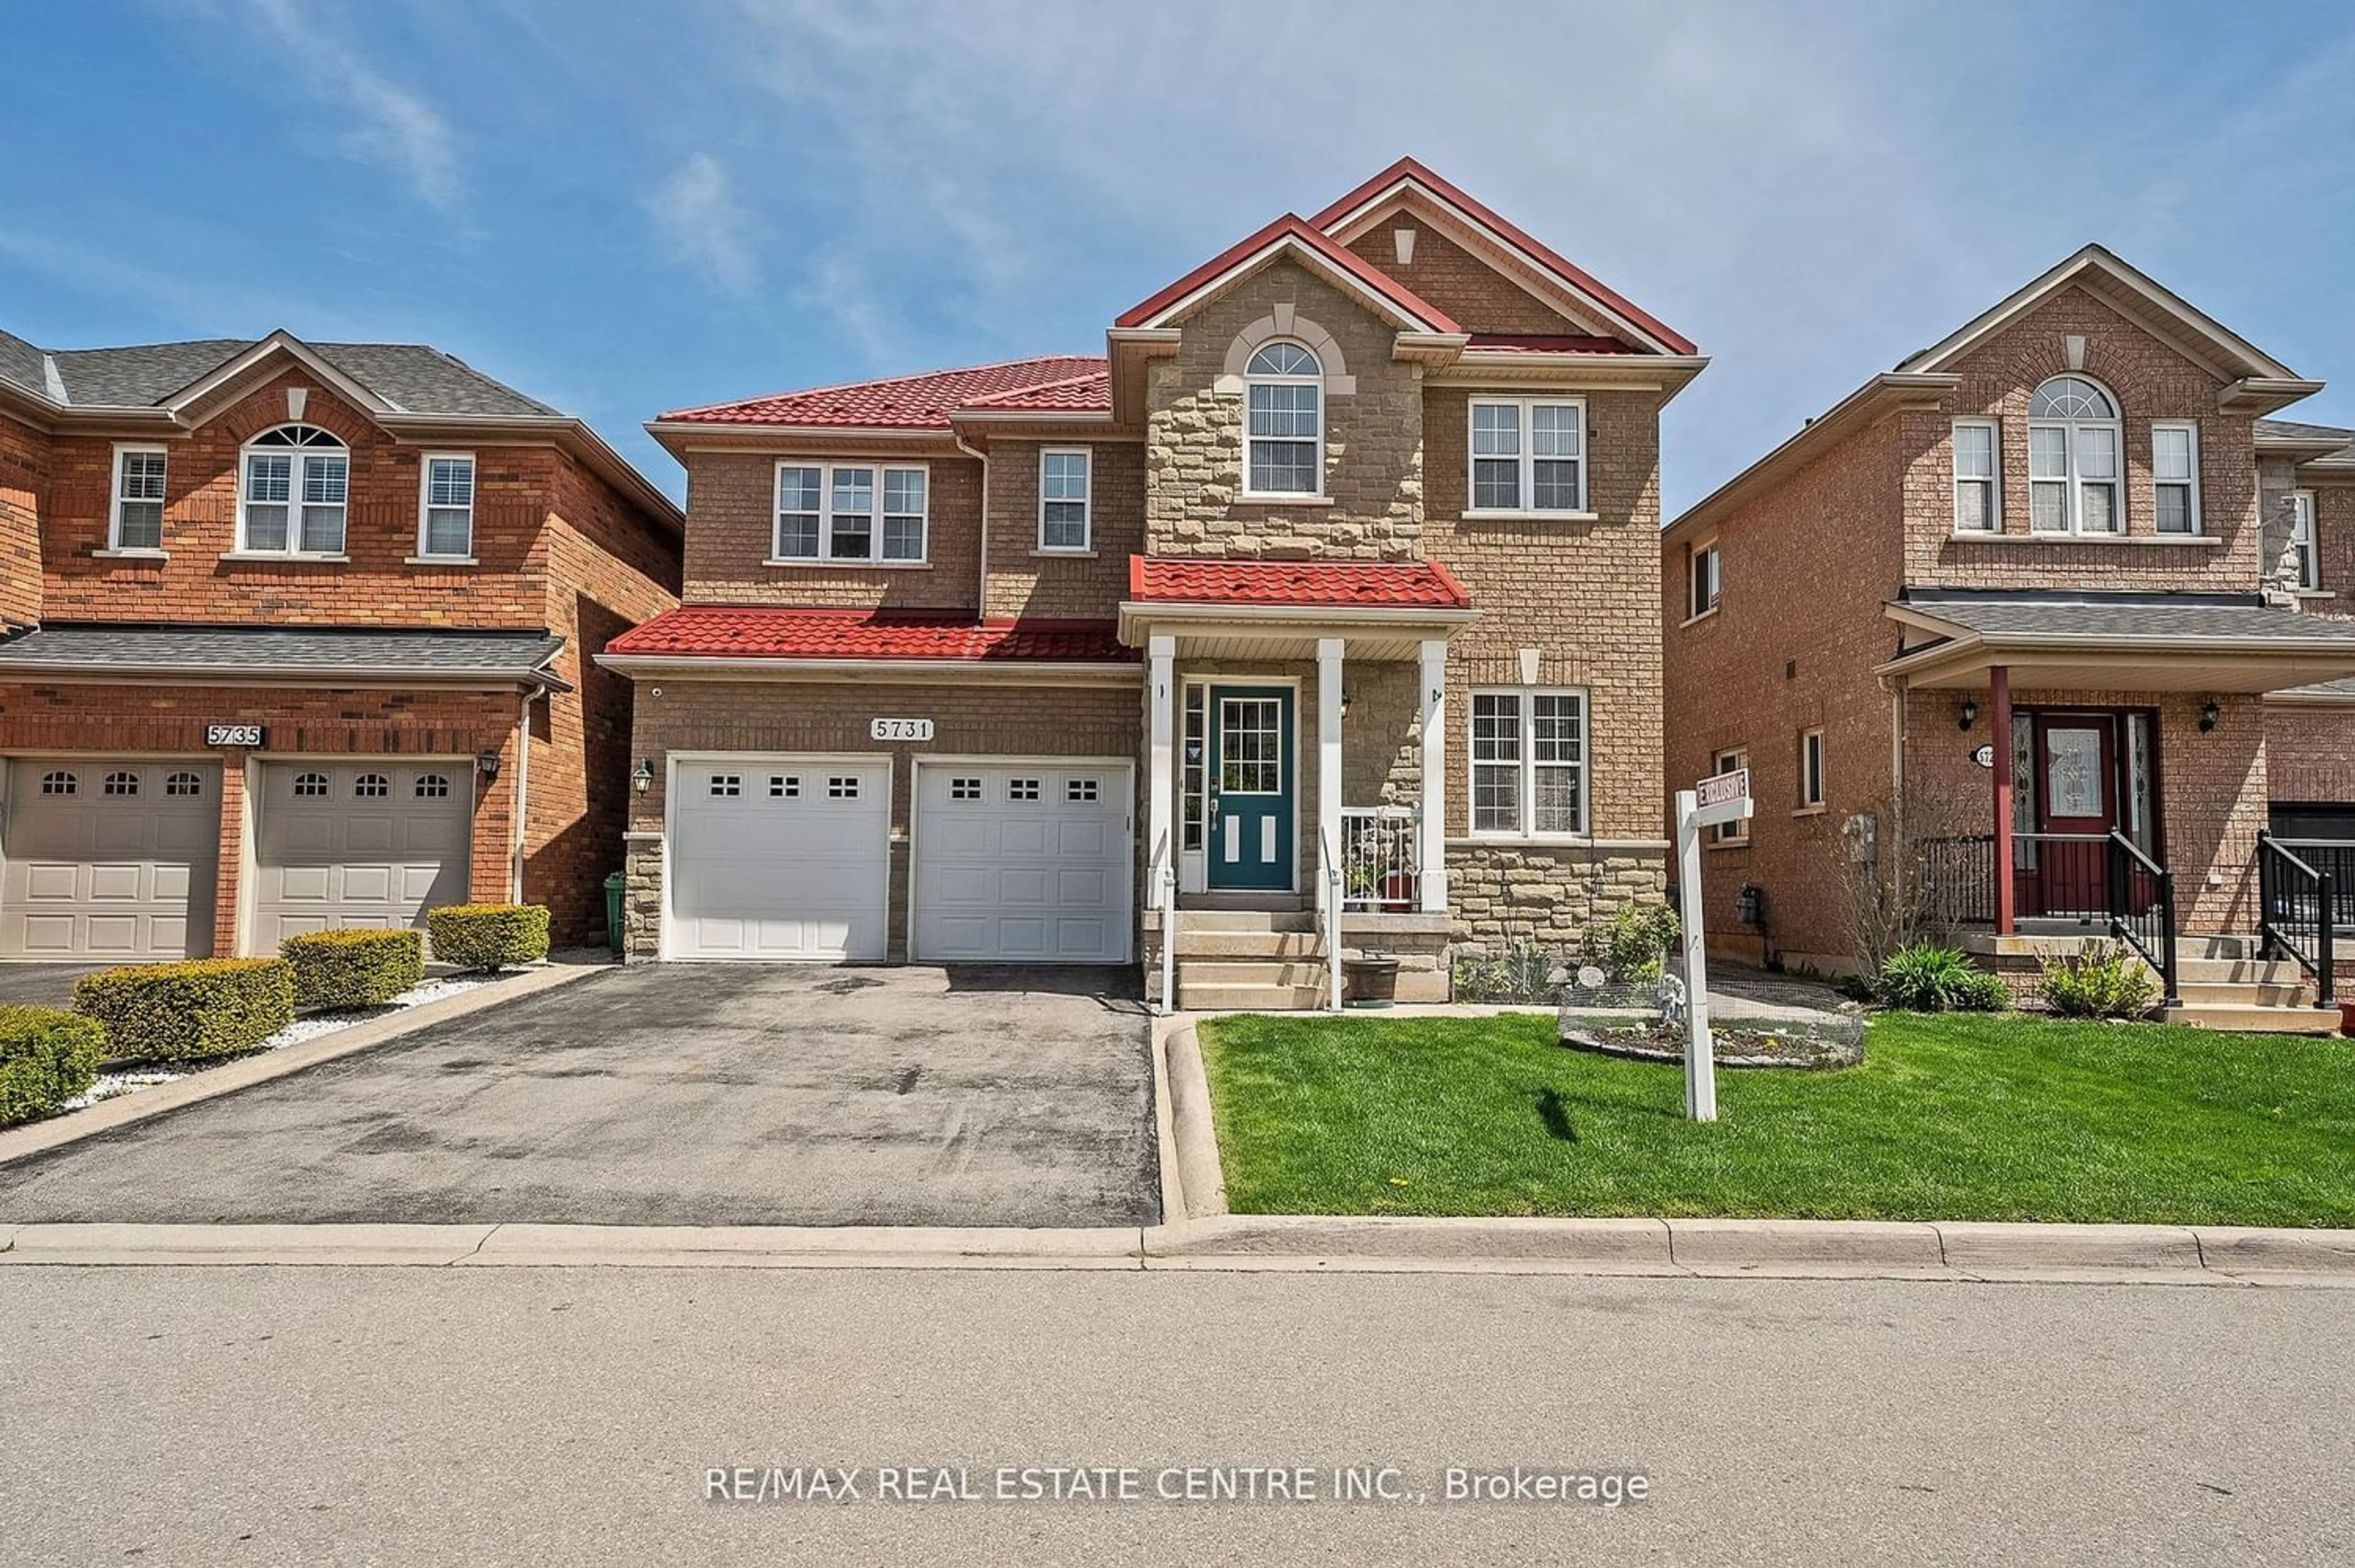 Home with brick exterior material for 5731 Raftsman Cove, Mississauga Ontario L5M 7B4